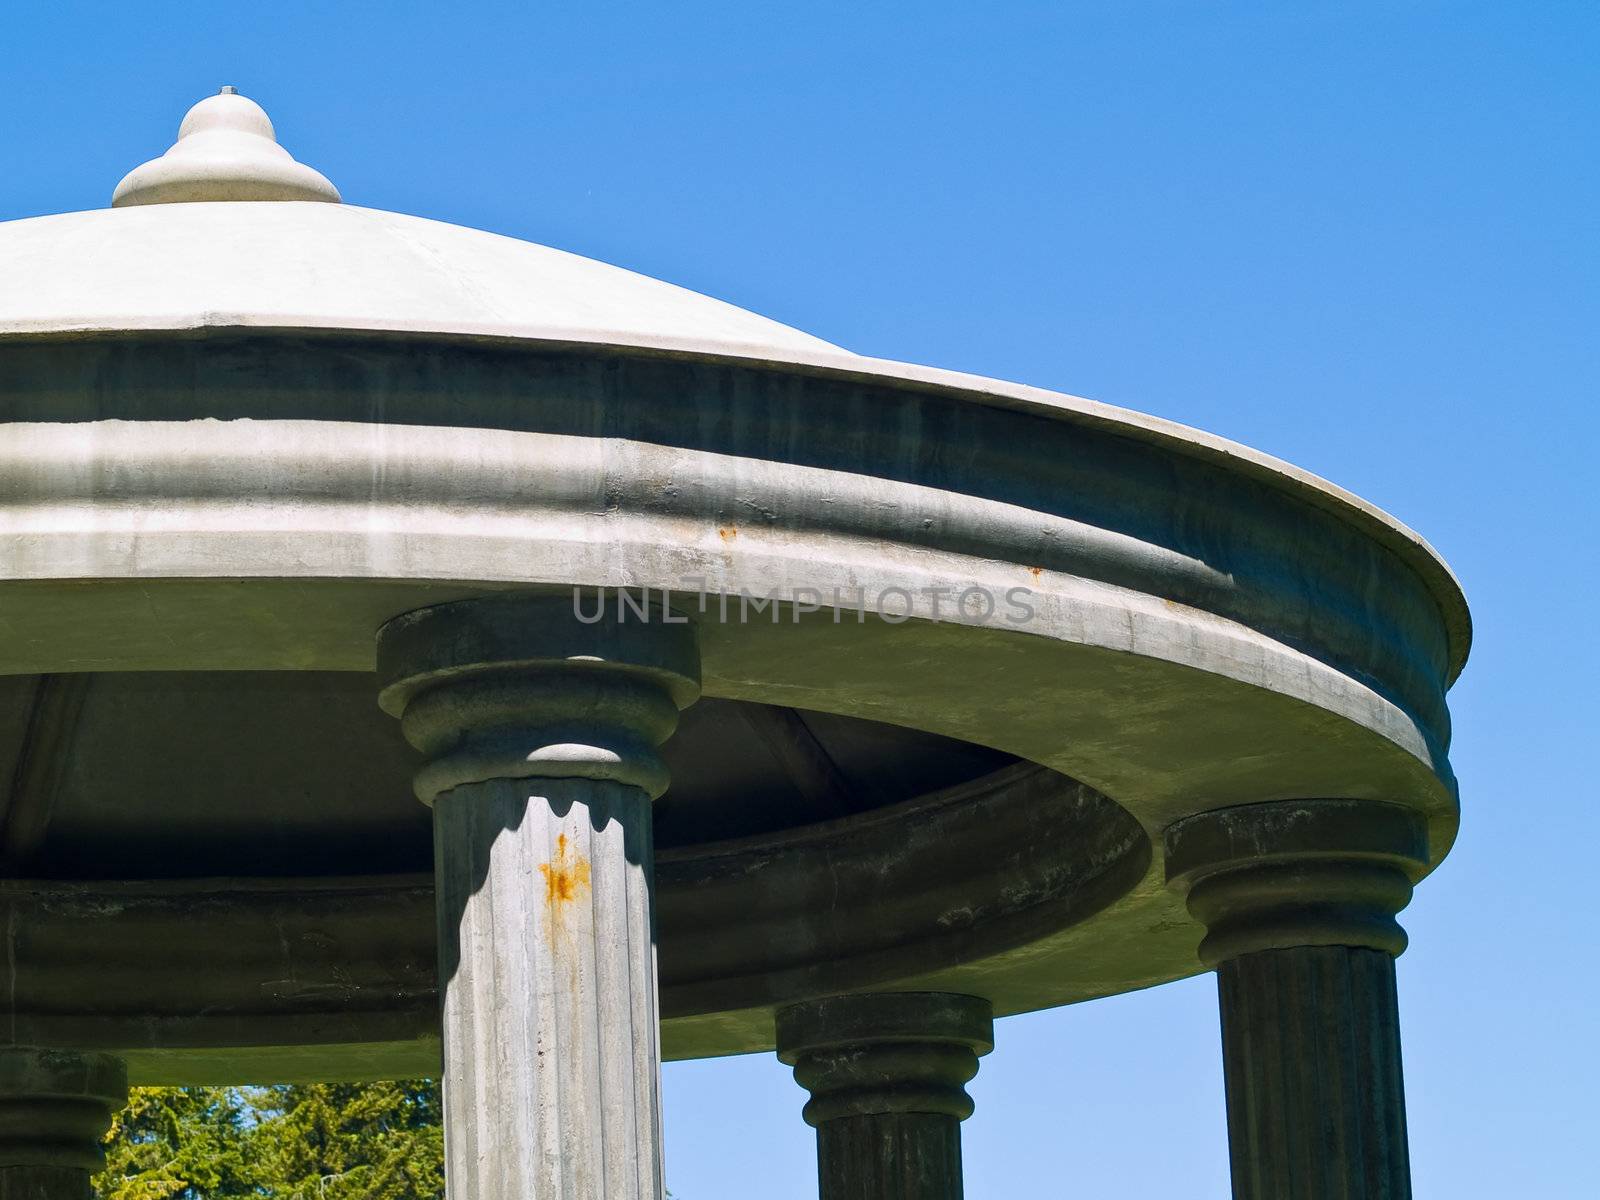 Outdoor Concrete Gazebo with Classic Column in a Park